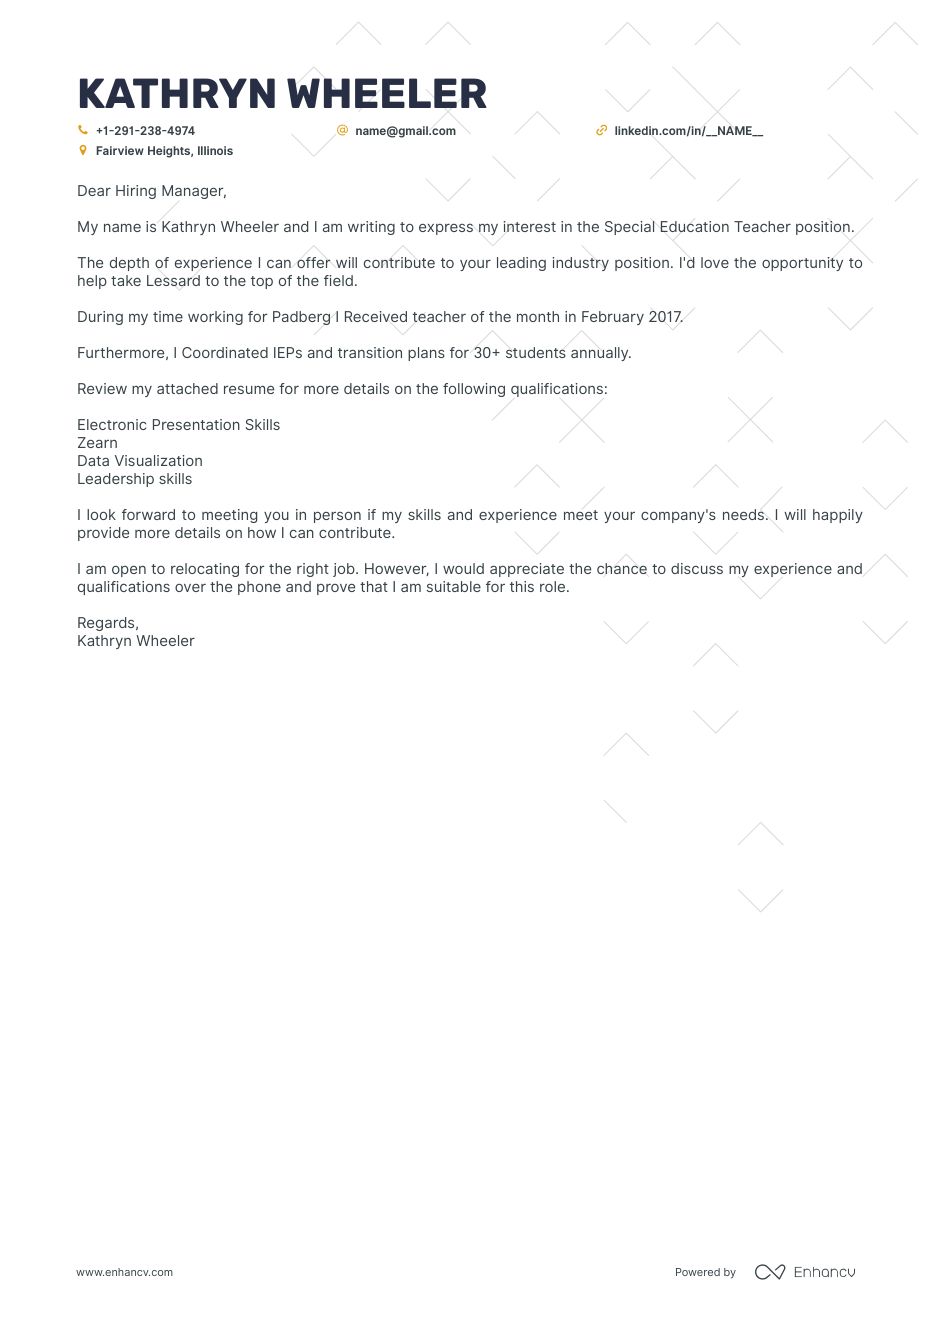 special-education-teacher-coverletter.png